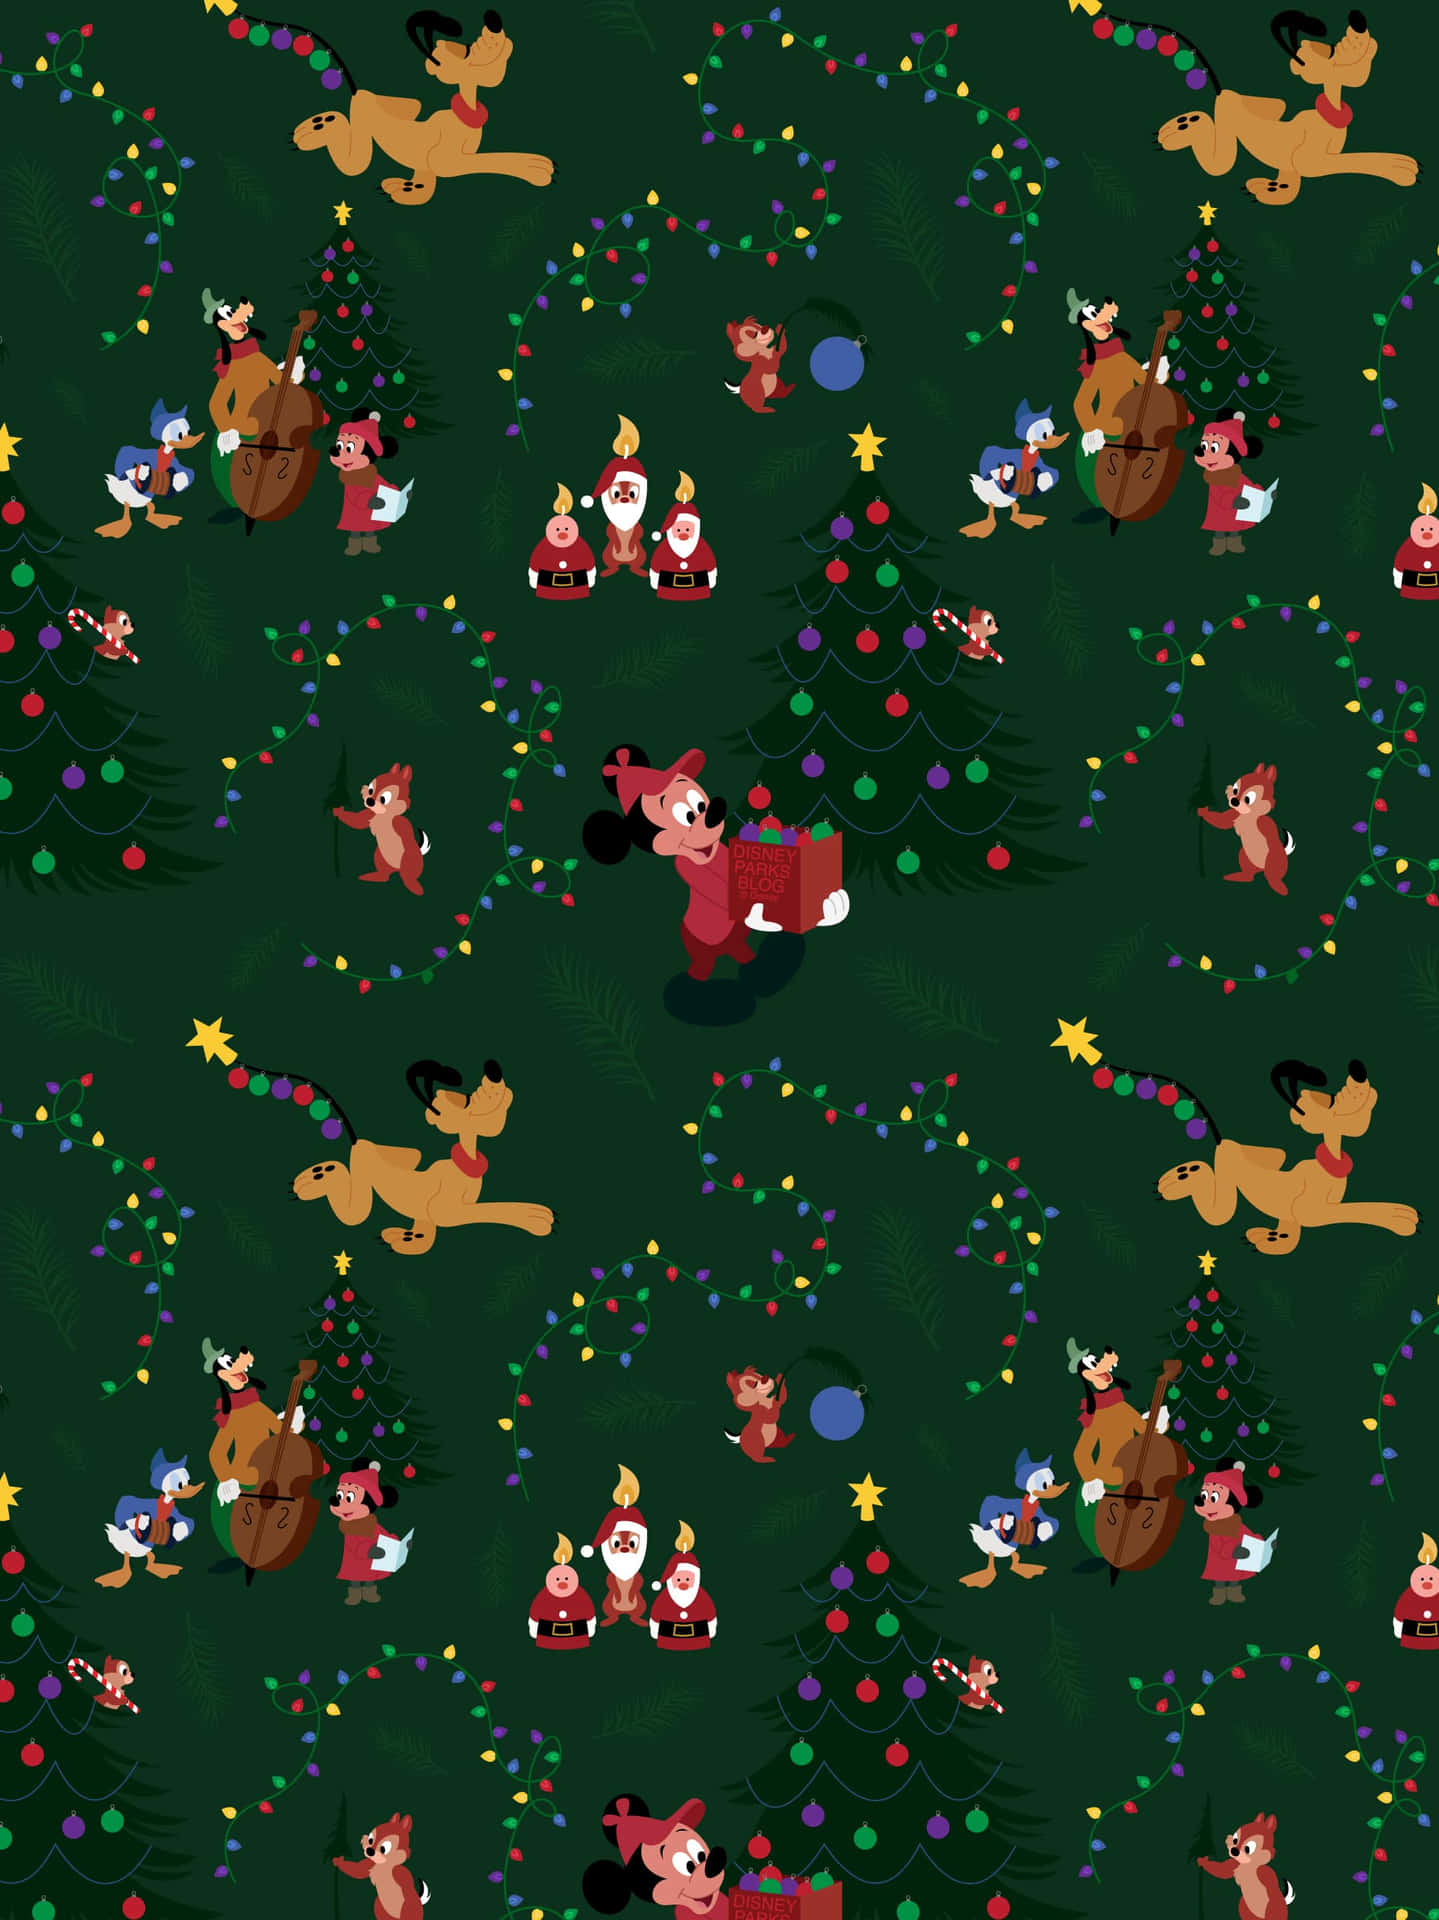 Get into the Christmas spirit with a Disney iPad! Wallpaper